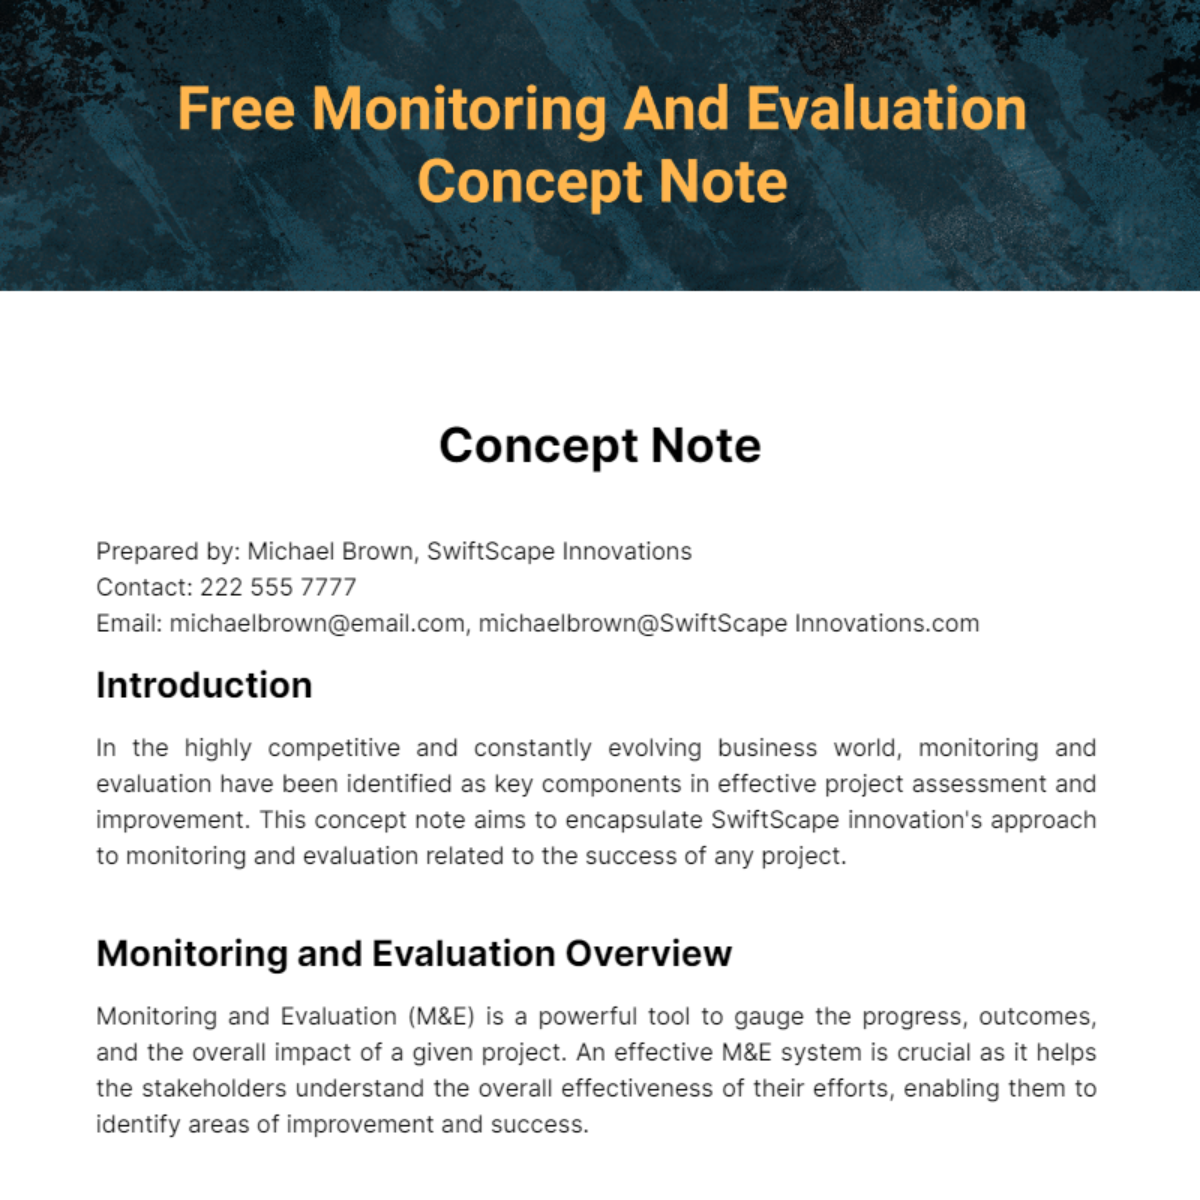 Free Monitoring and Evaluation Concept Note Template